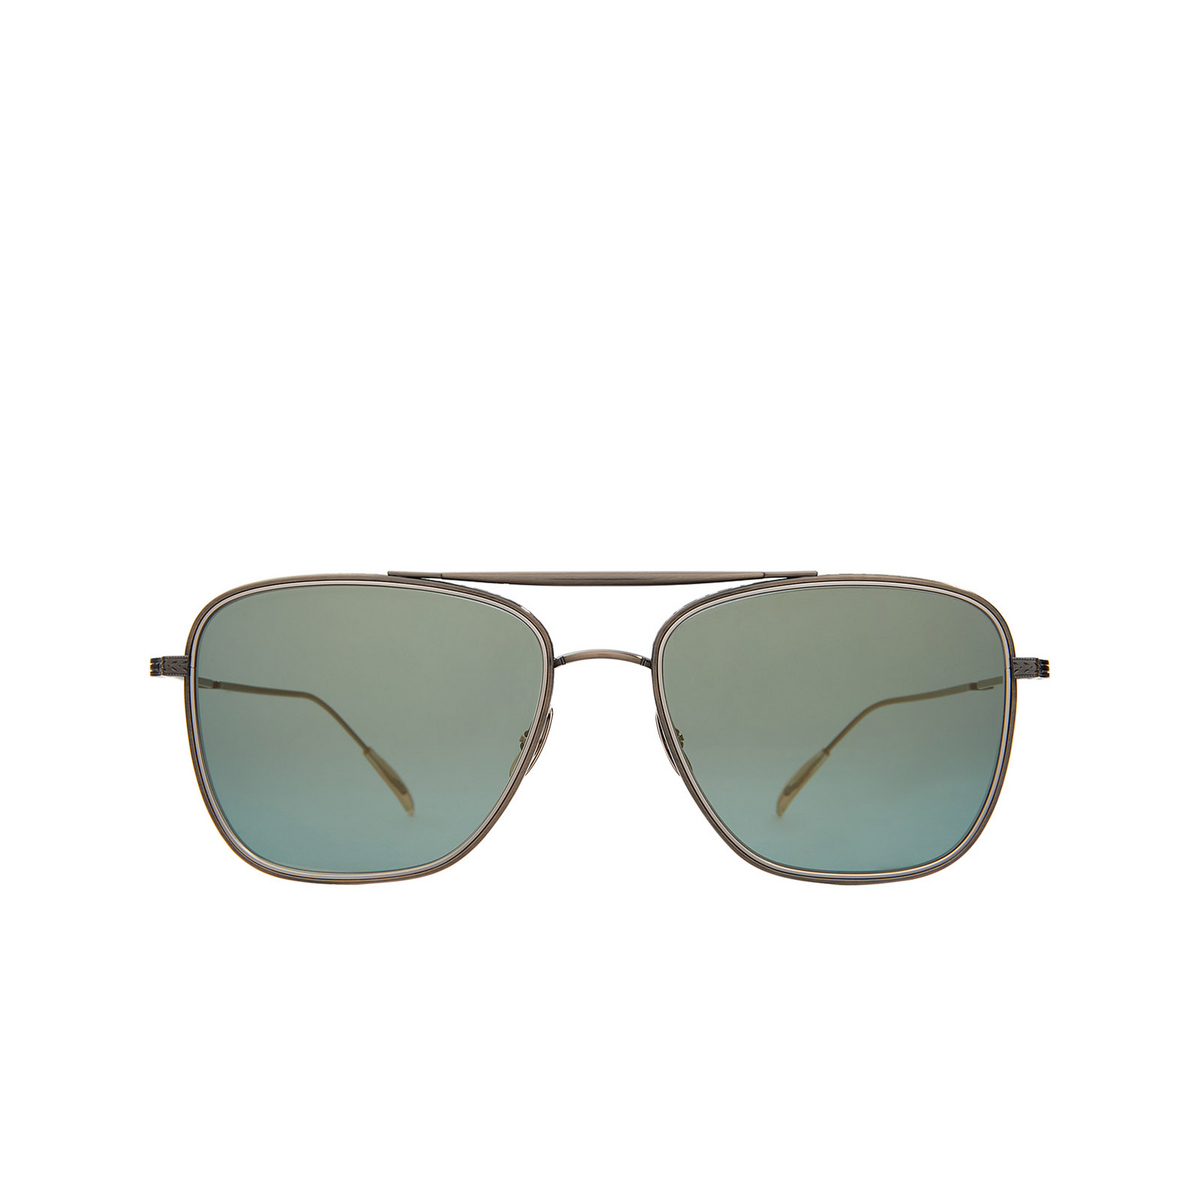 Mr. Leight NOVARRO S Sunglasses ATG-SMT/G15F Antique Gold-Summit - front view